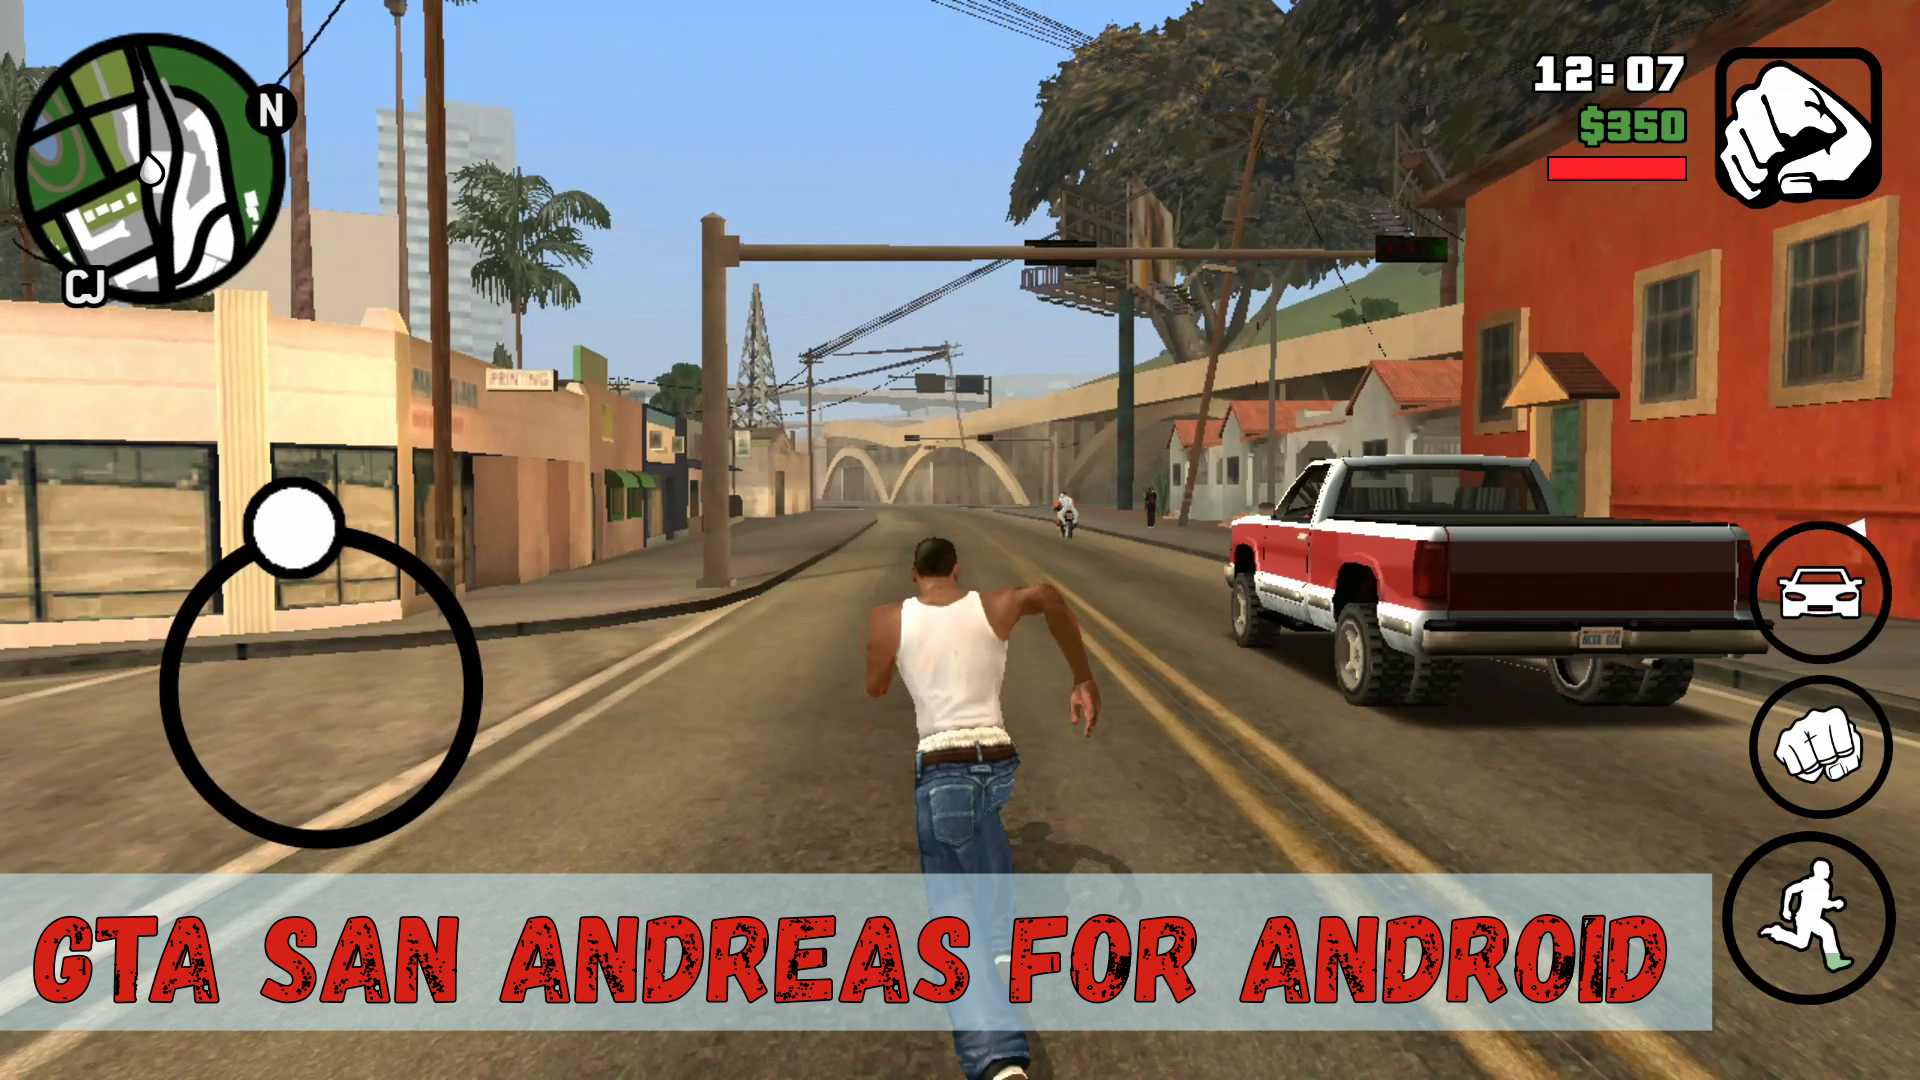 Download Game Grand Theft Auto San Andreas Mod Apk Data hqever